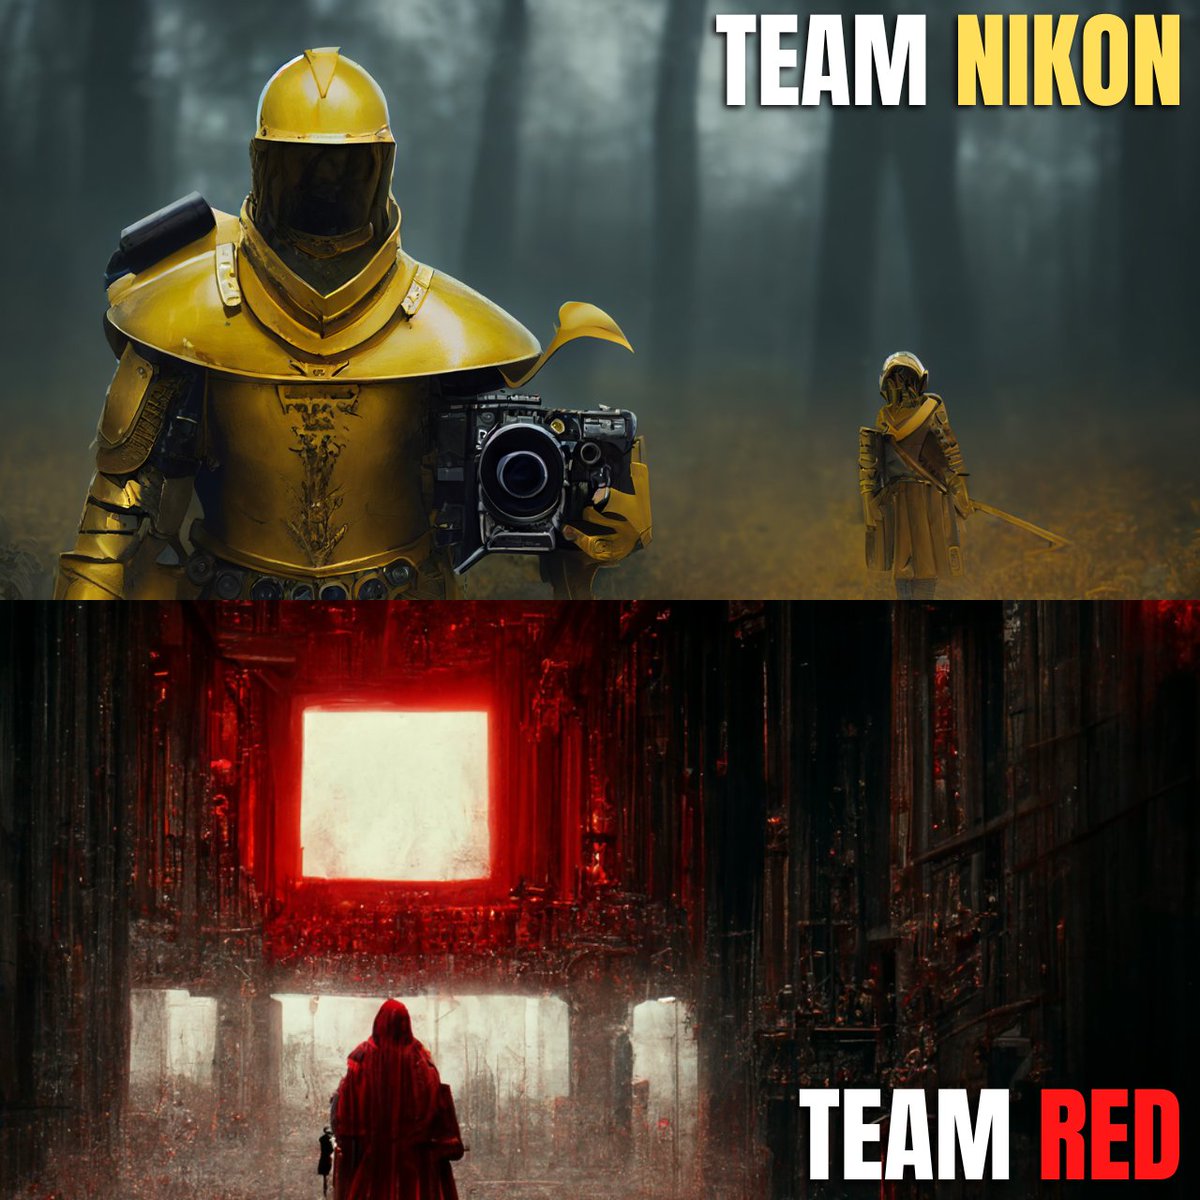 With the lawsuit filed by RED against NIKON for using internal compressed RAW. Whose side do you choose? #teamNIKON #TeamRED --> youtube.com/watch?v=__X25F…